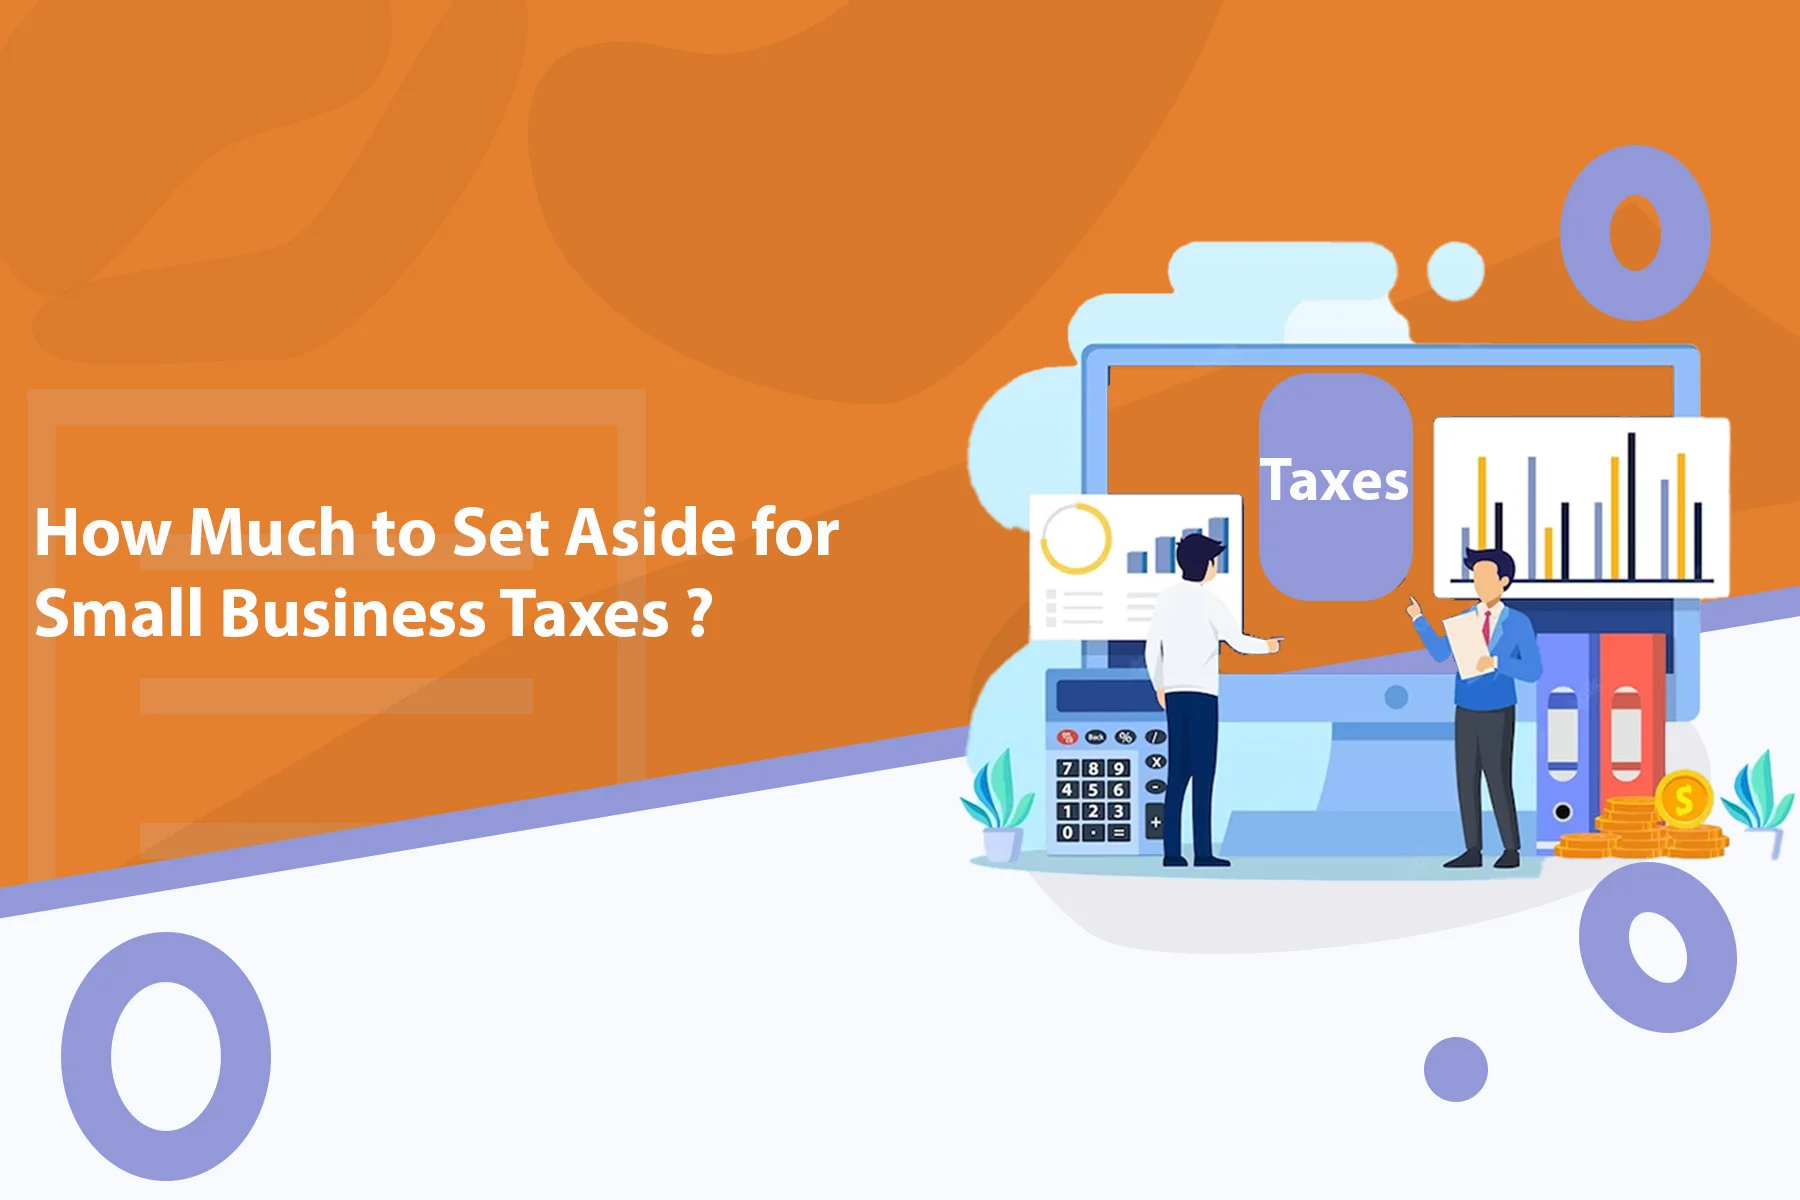 How Much to Set Aside for Small Business Taxes?